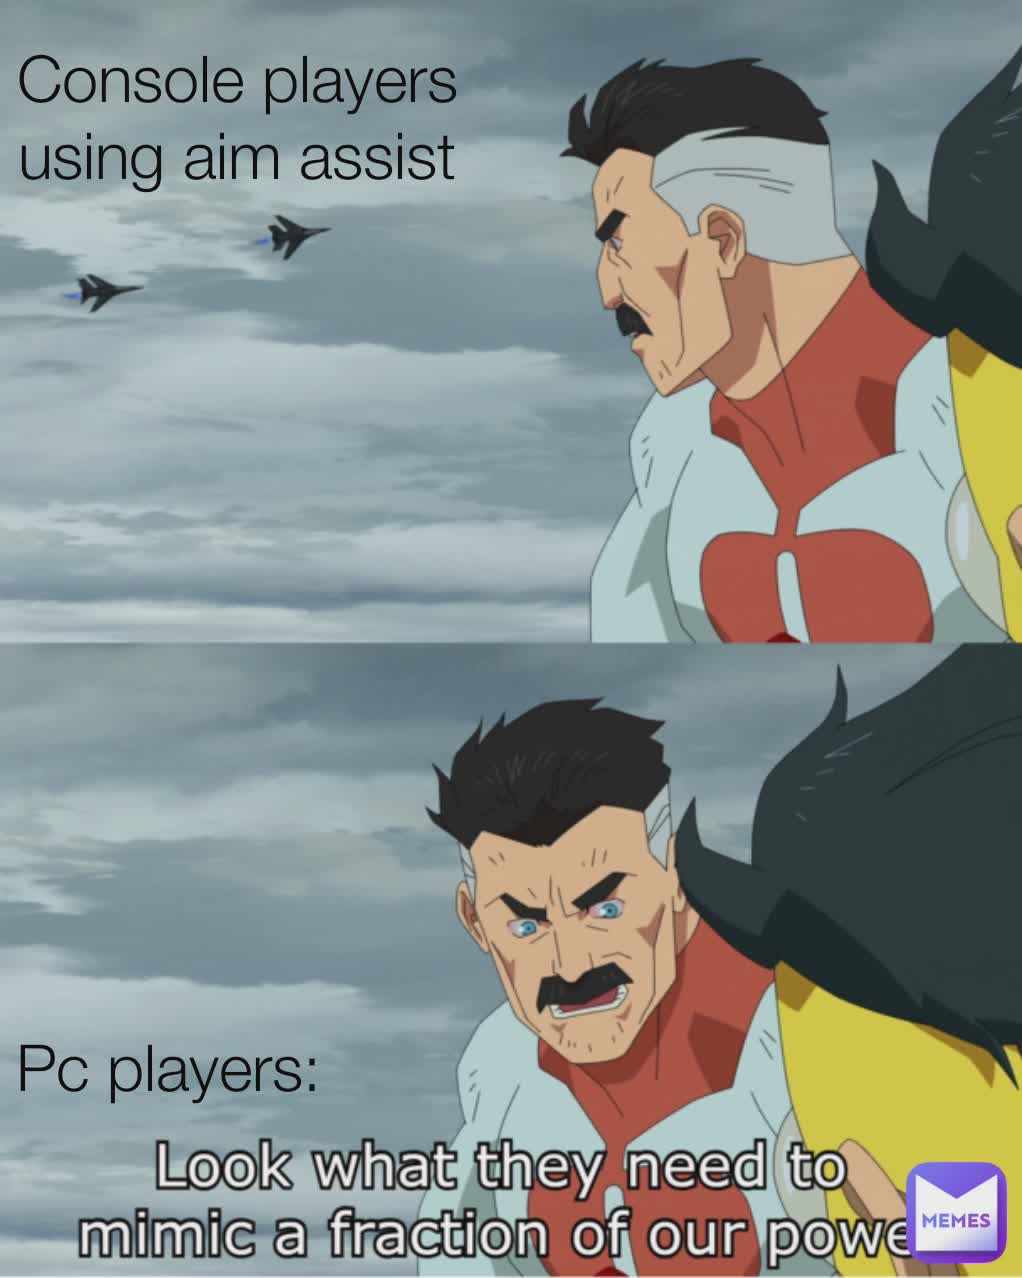 Console players using aim assist console players using aim assist
 Pc players Console players using aim assist Pc players: